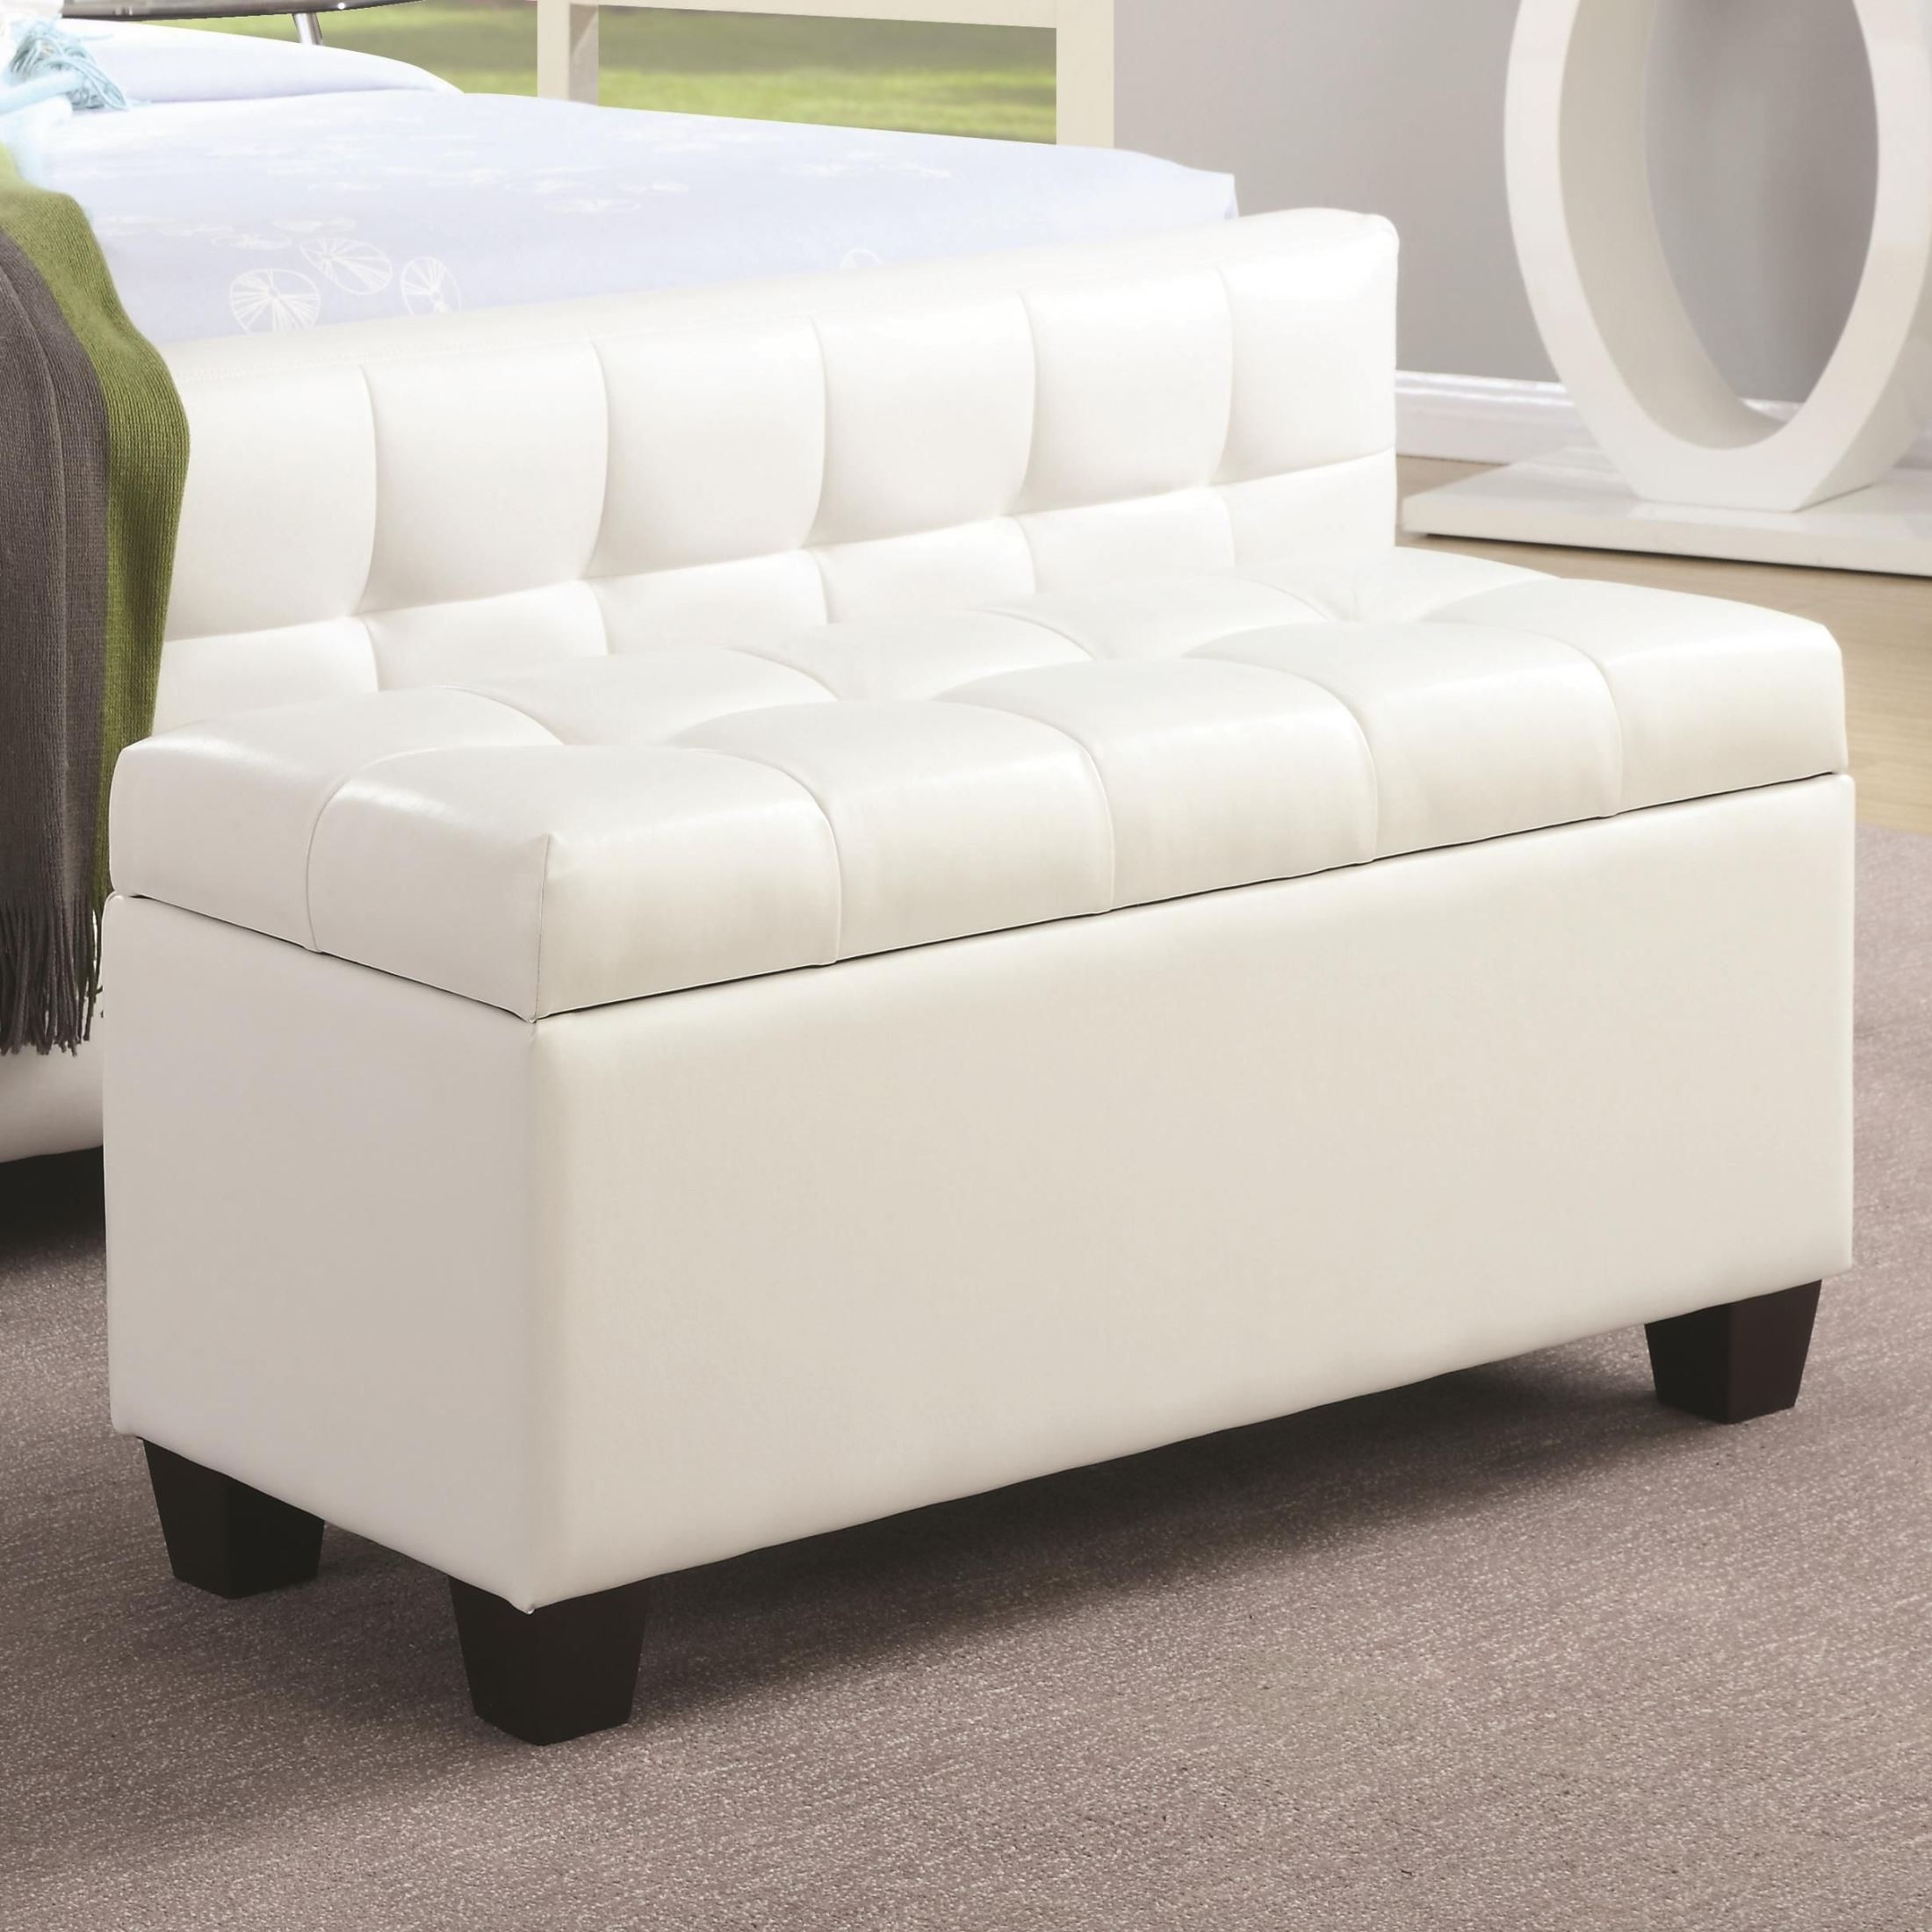 Leather Bench With Storage
 White Faux Leather Rectangular Storage Bench from